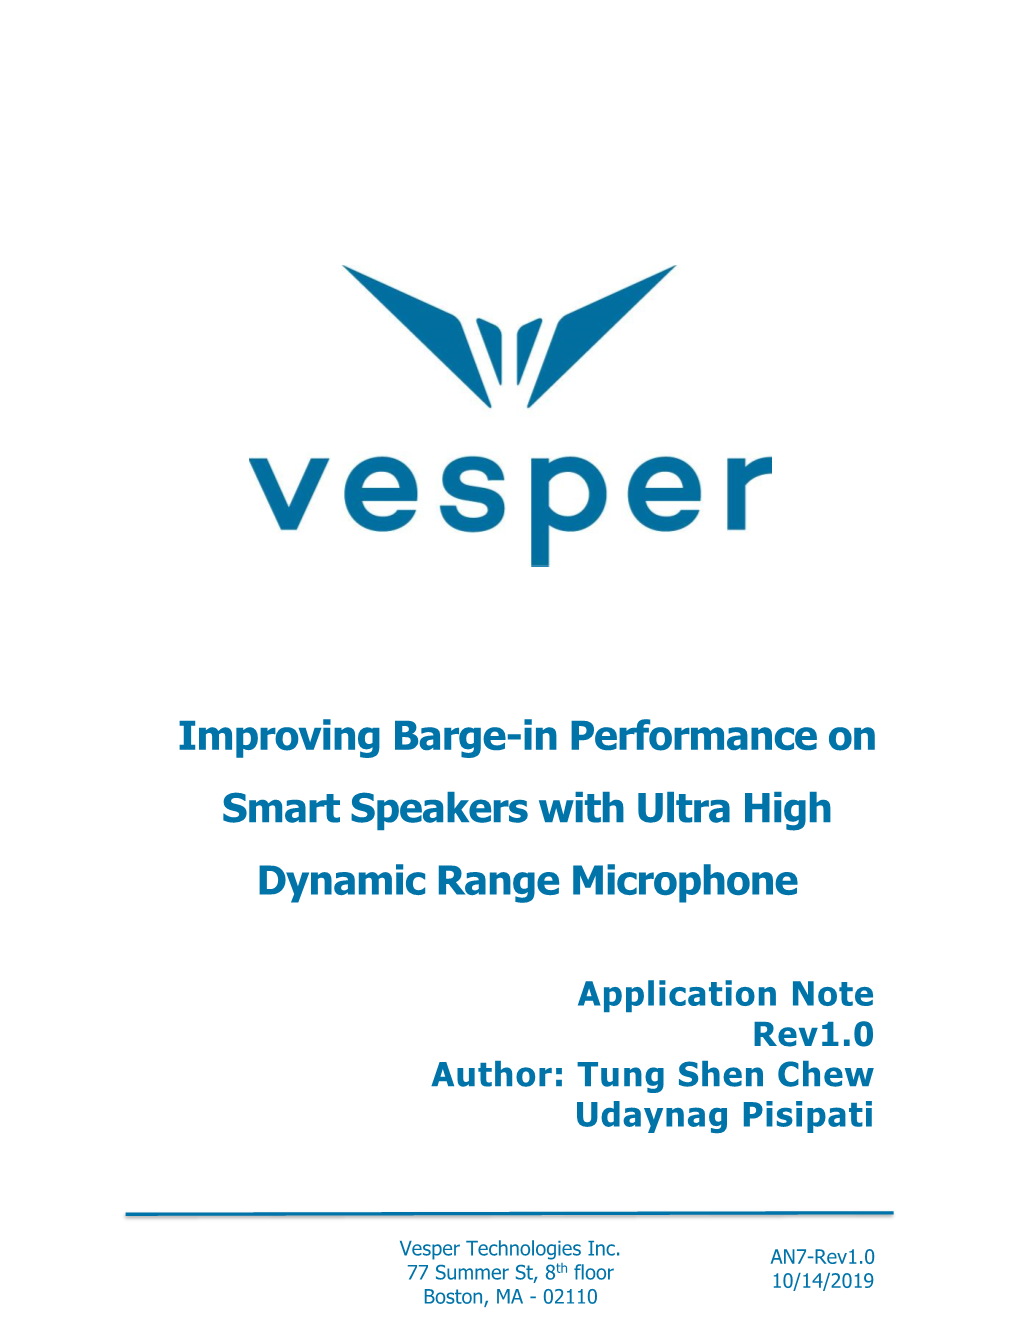 Improving Barge-In Performance on Smart Speakers with Ultra High